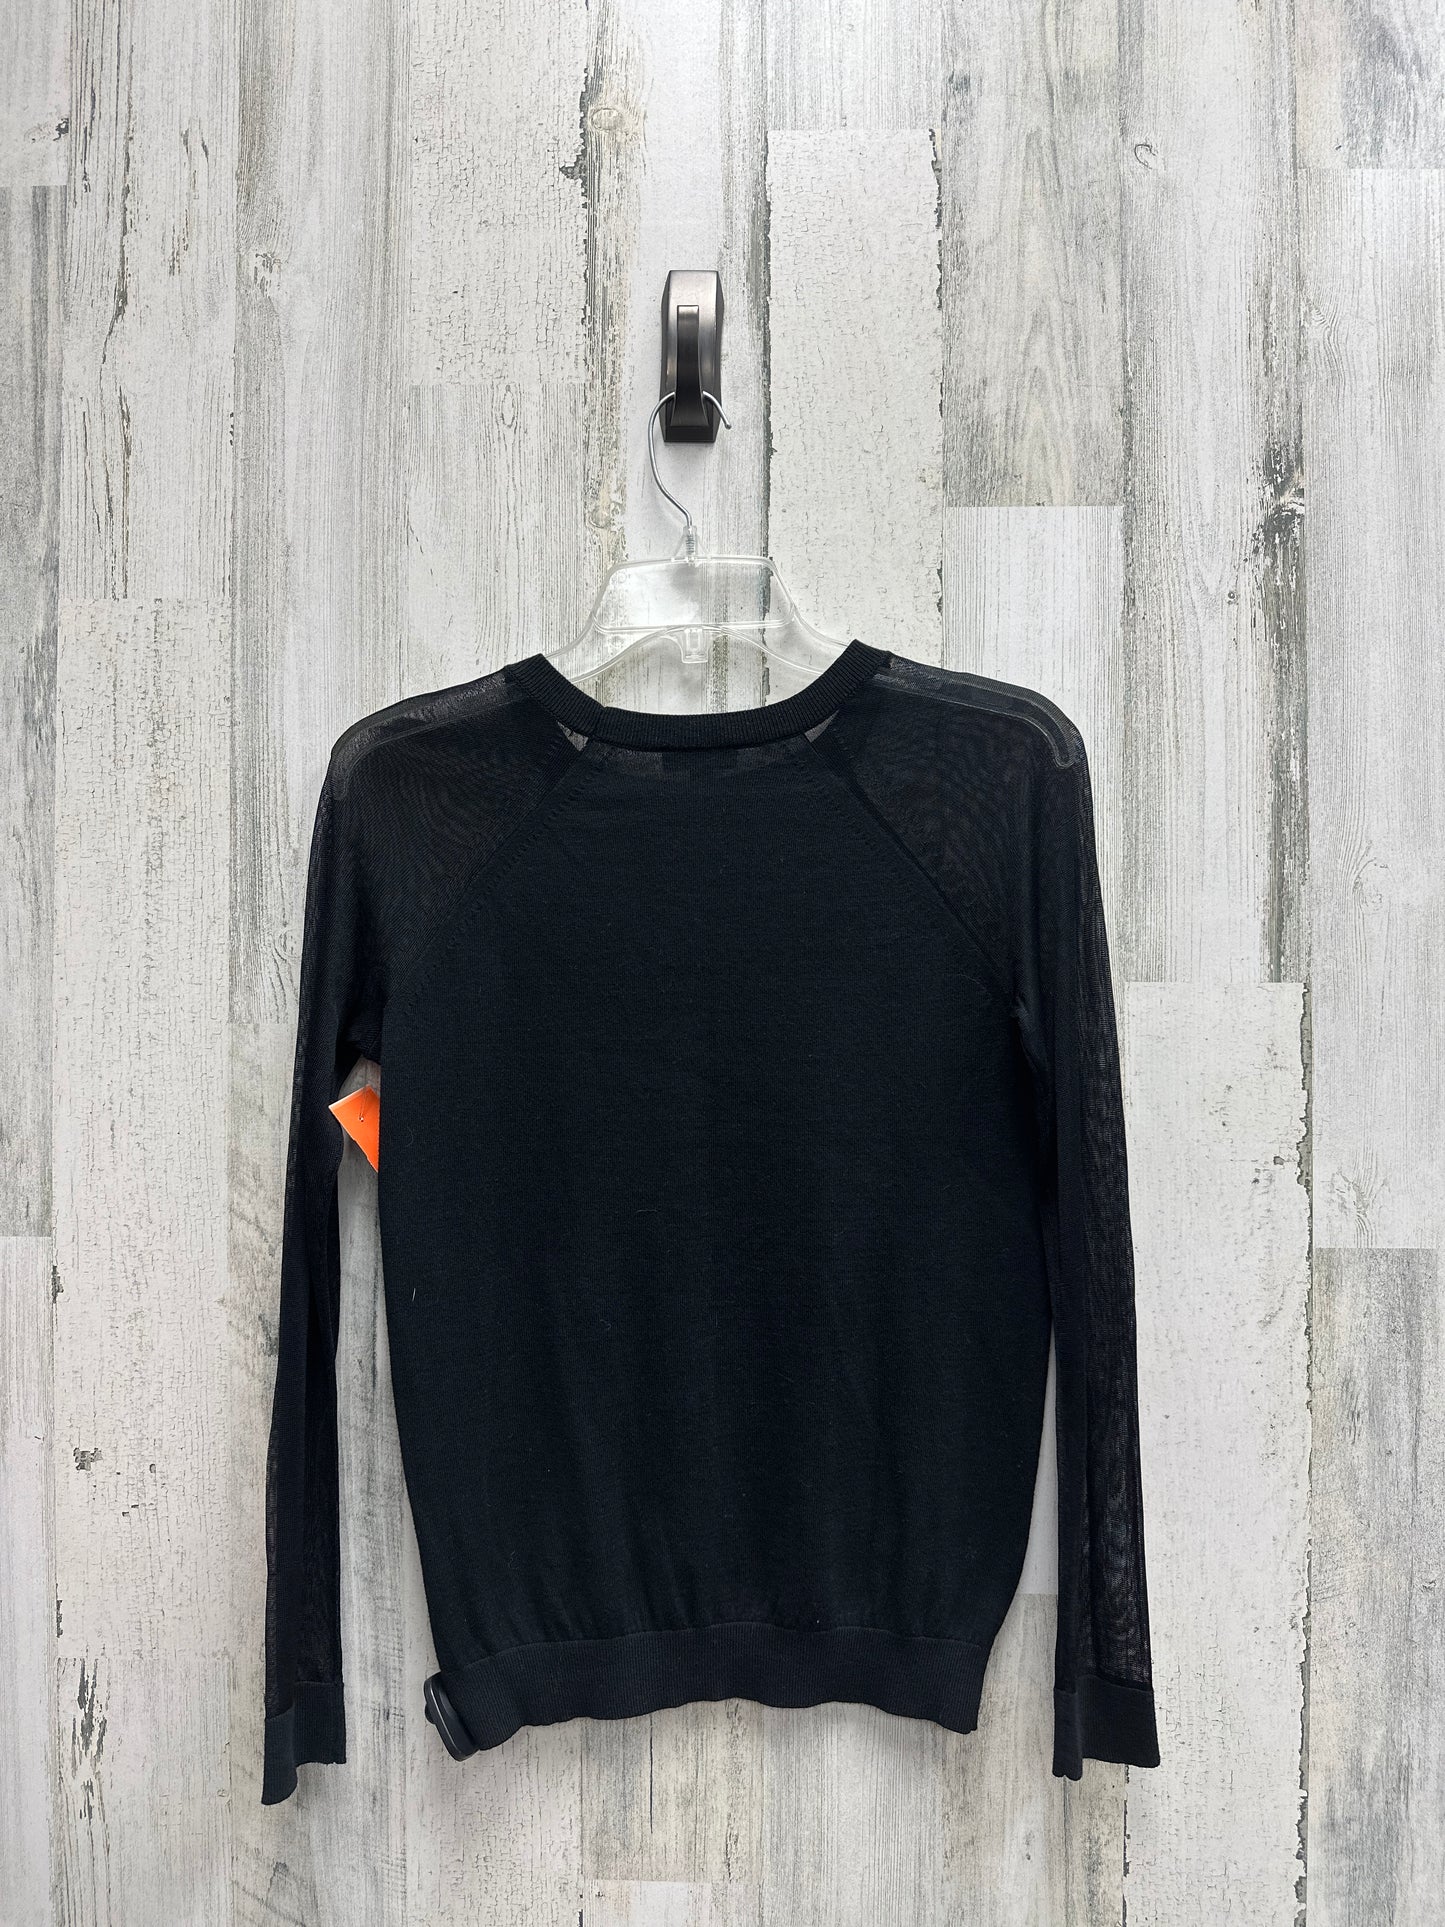 Top Long Sleeve By Vince Camuto  Size: Petite   Xs